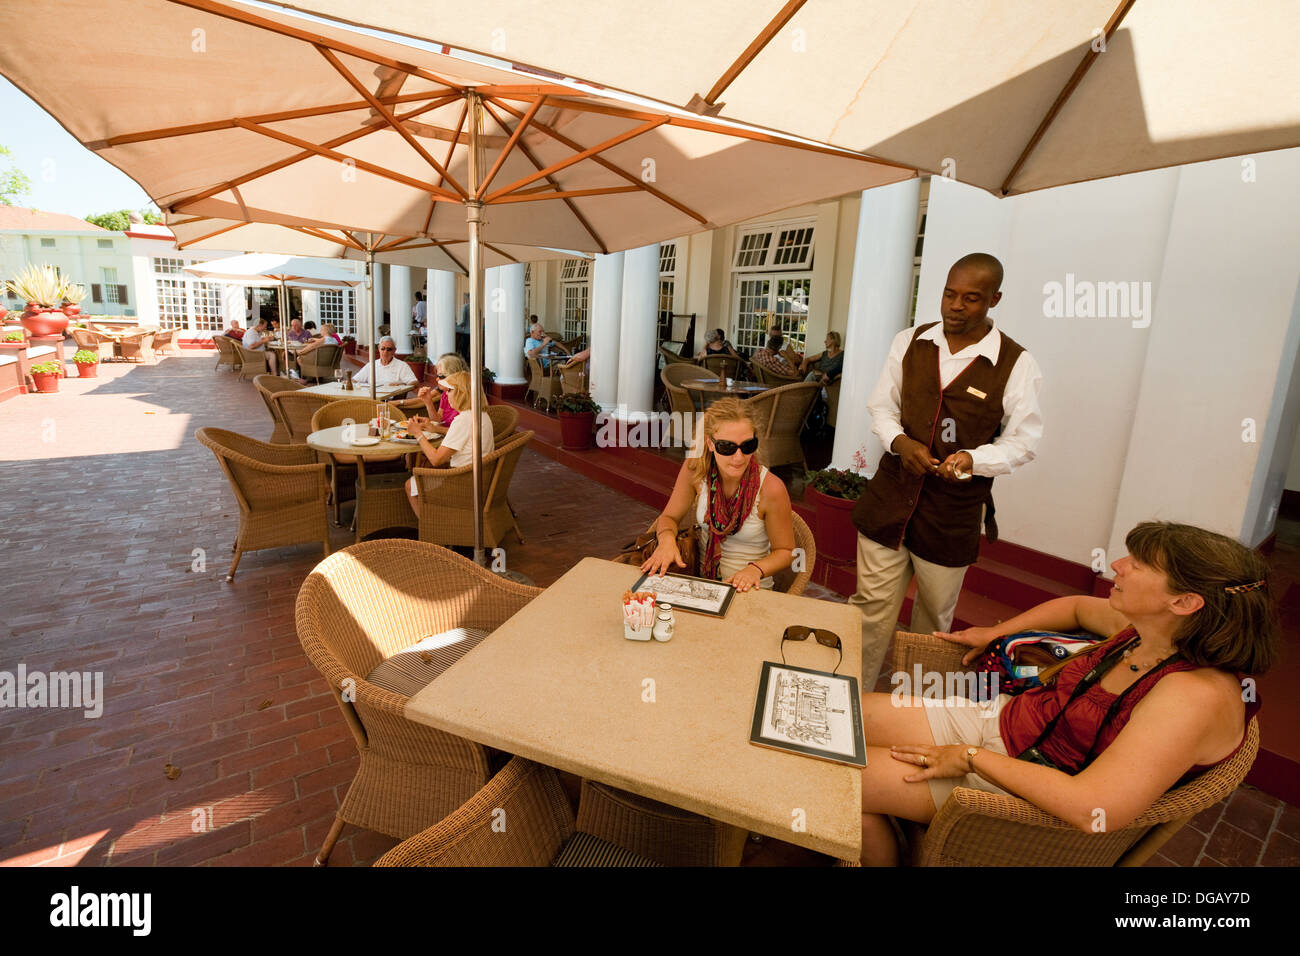 Guests ordering tea from the waiter, the veranda of the 5 star Victoria Falls Hotel, Zimbabwe Africa Stock Photo